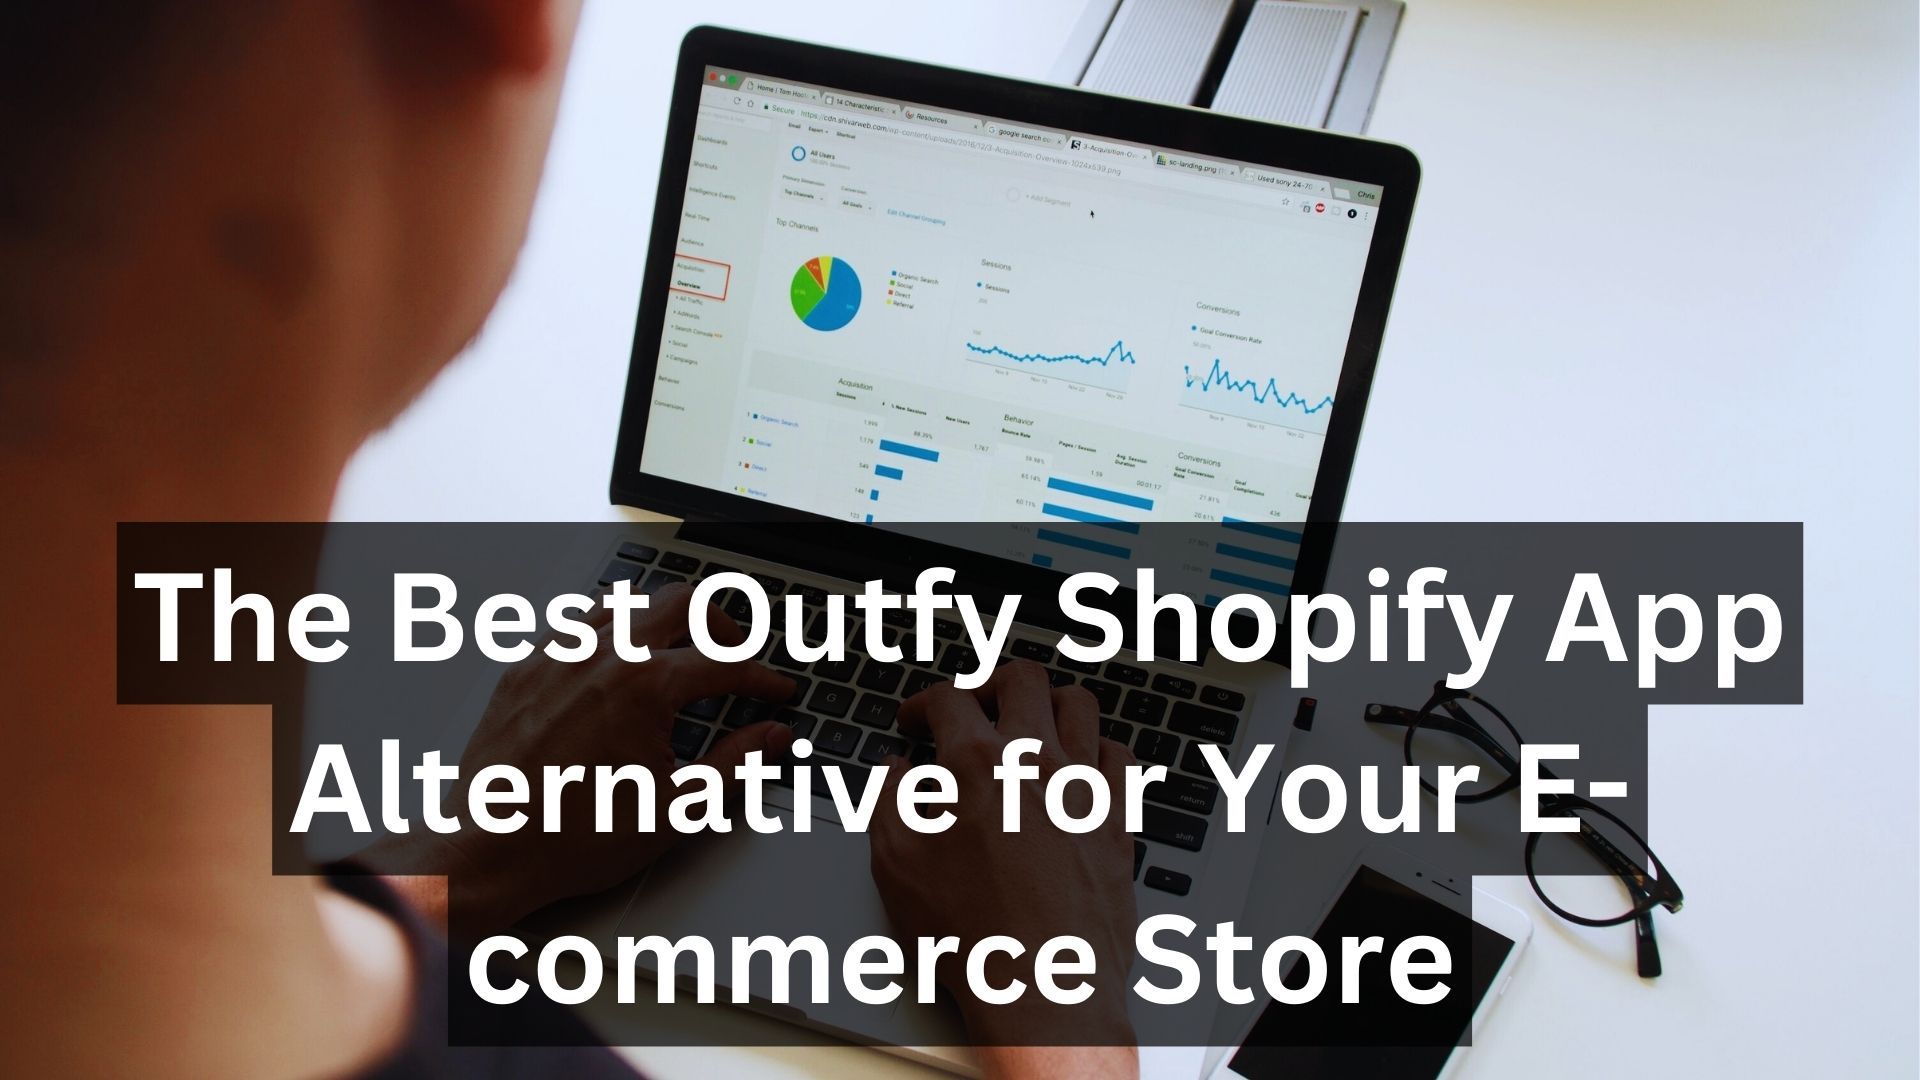 The Best Outfy Shopify App Alternative for Your E-commerce Store